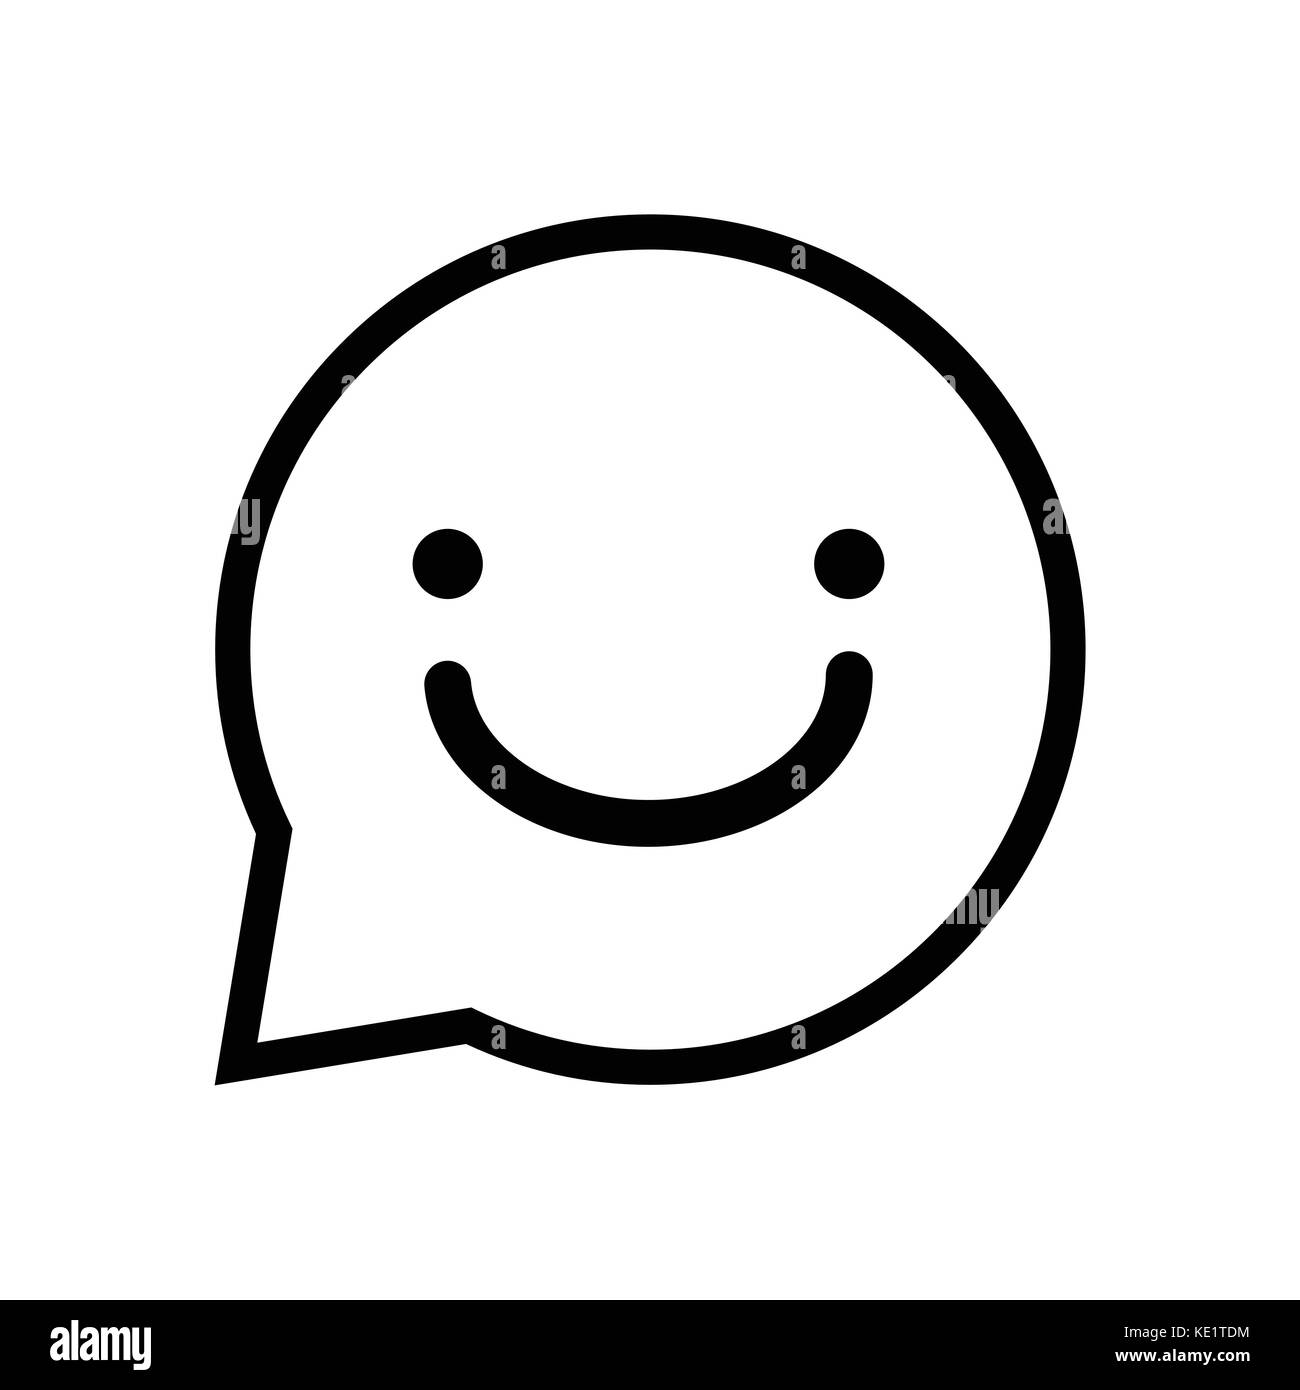 Chat sign smile icon, iconic symbol inside a speech bubble, isolated on white background. Vector Iconic Design. Stock Vector